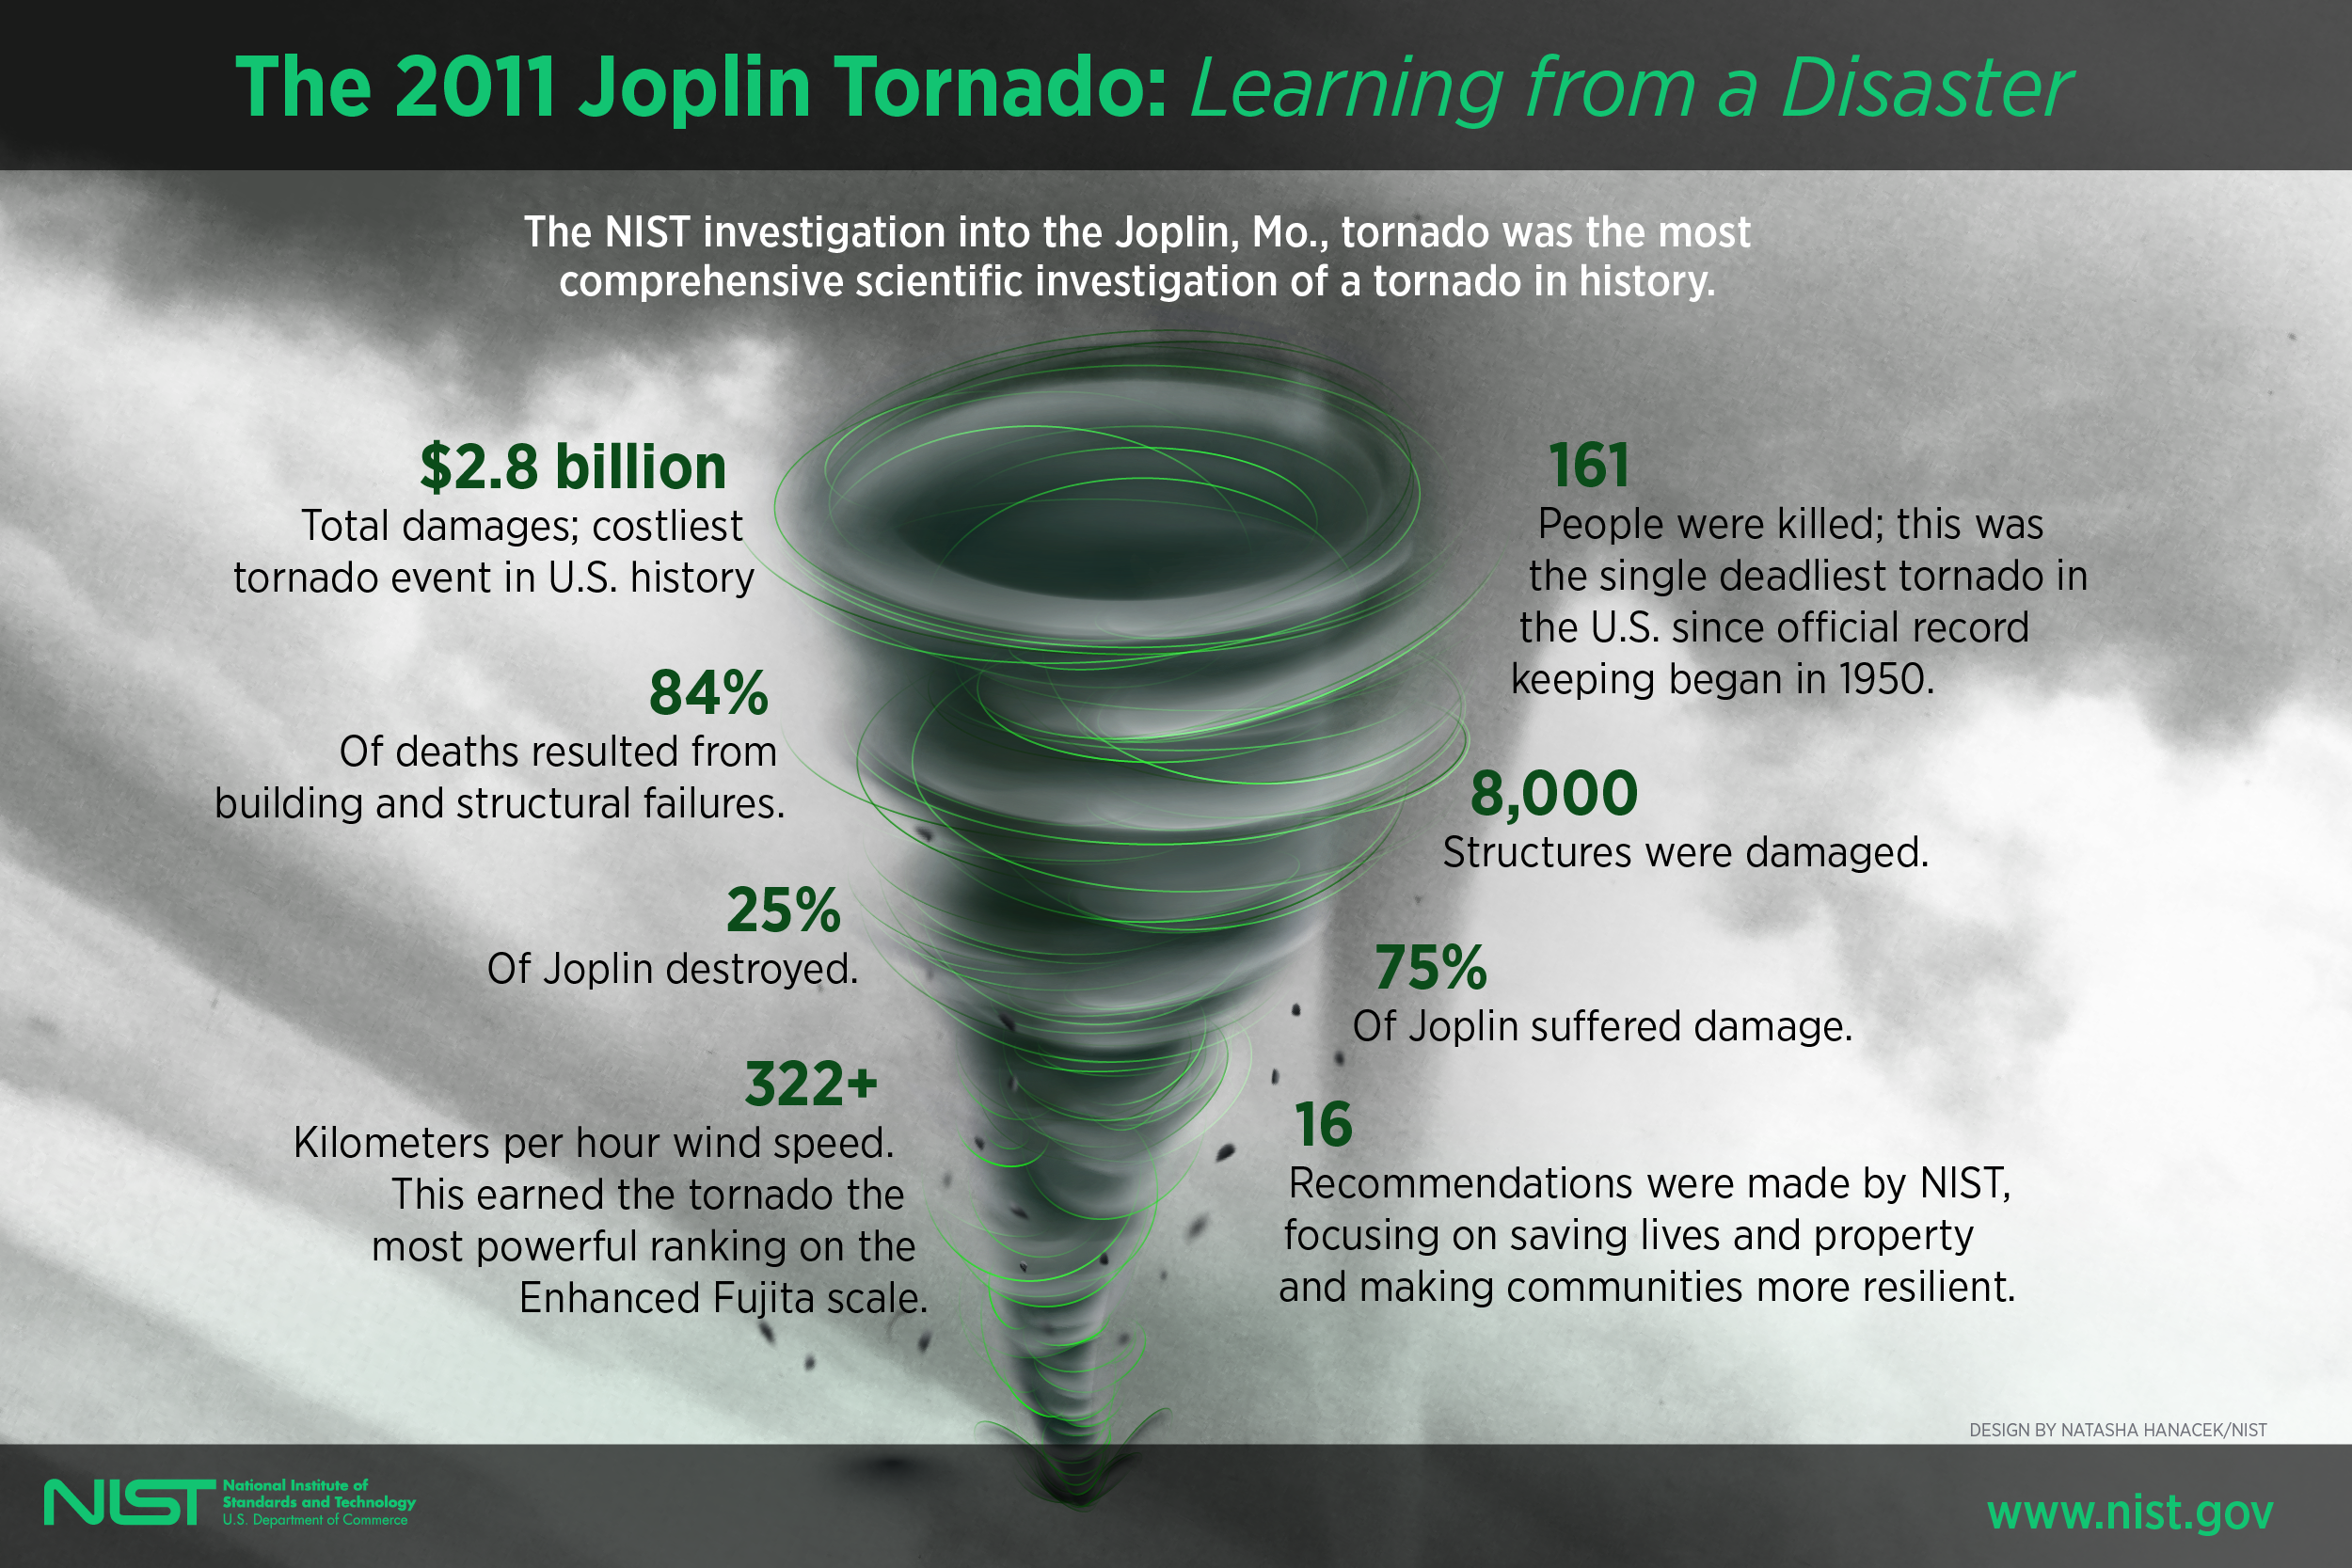 The Joplin Tornado: A Calamity and a Boon to Resilience, 10 Years On | NIST